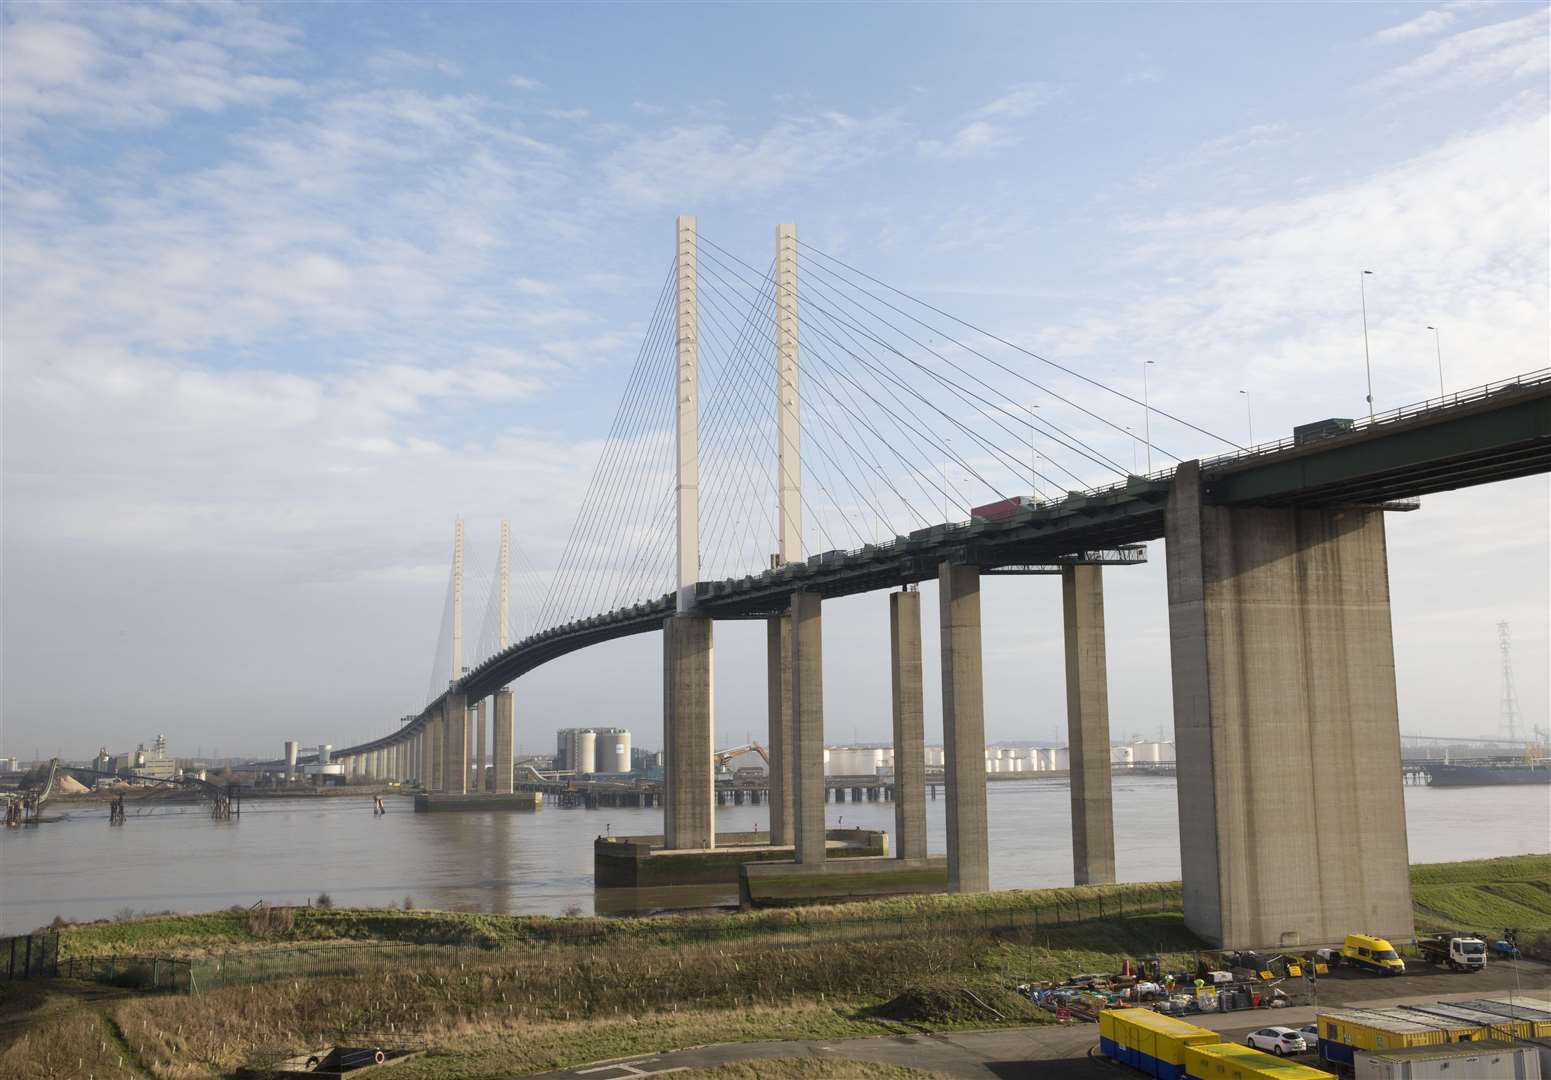 The speed limit was reduced on the Dartford Crossing